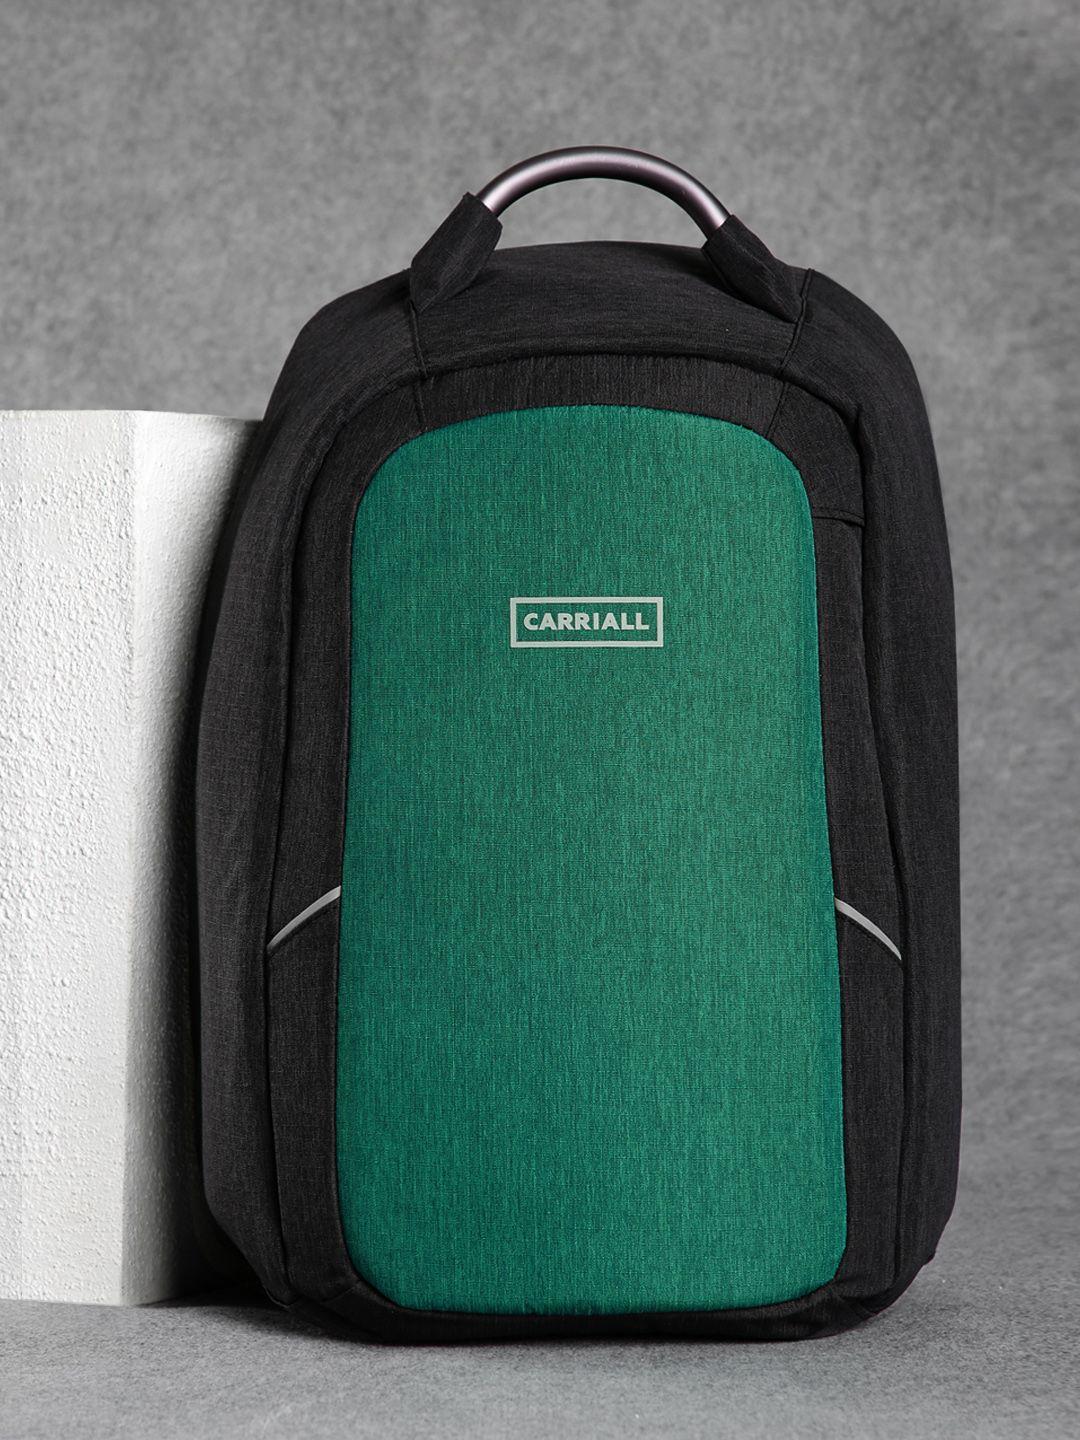 carriall unisex green & black columbus anti theft backpack with bluetooth functionality